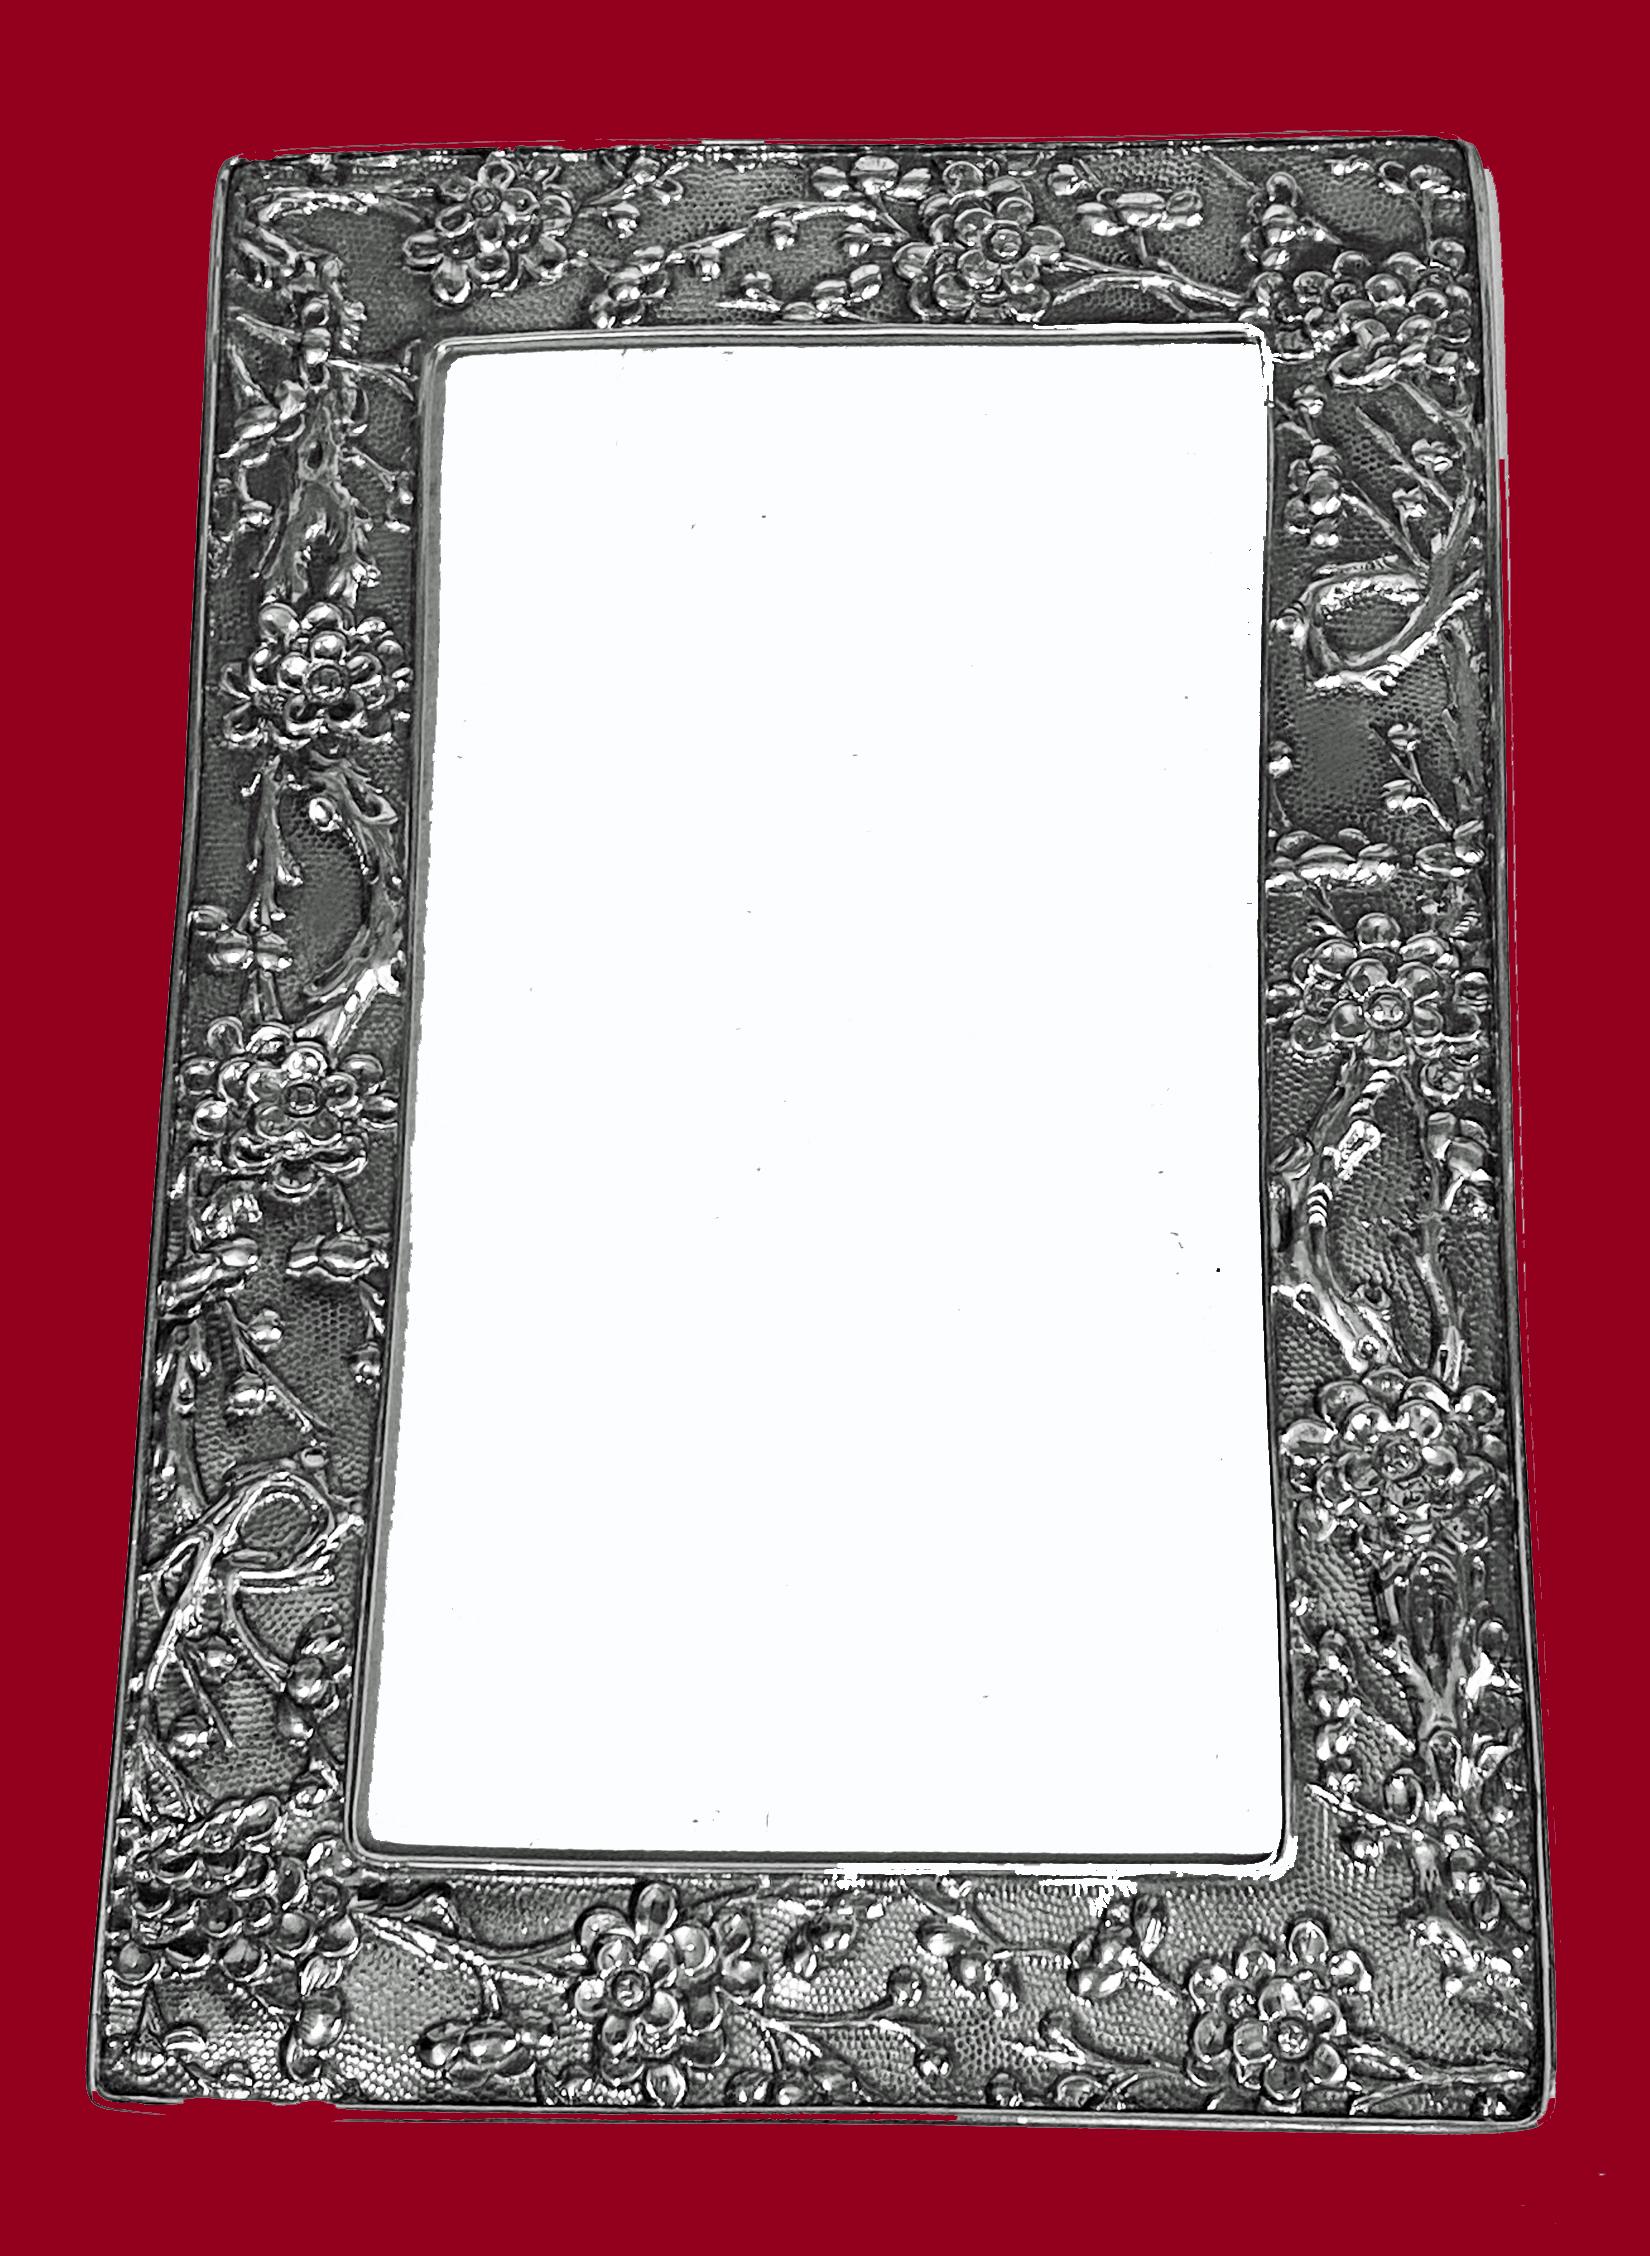 Chinese Export Silver Photograph Frame Wang Hing C.1890. Rectangular shape with exquisite foliage relief motif on matte stippled background. Original easel to reverse and marked with both Chinese marks for Wang Hing and WH90. Overall measurements: